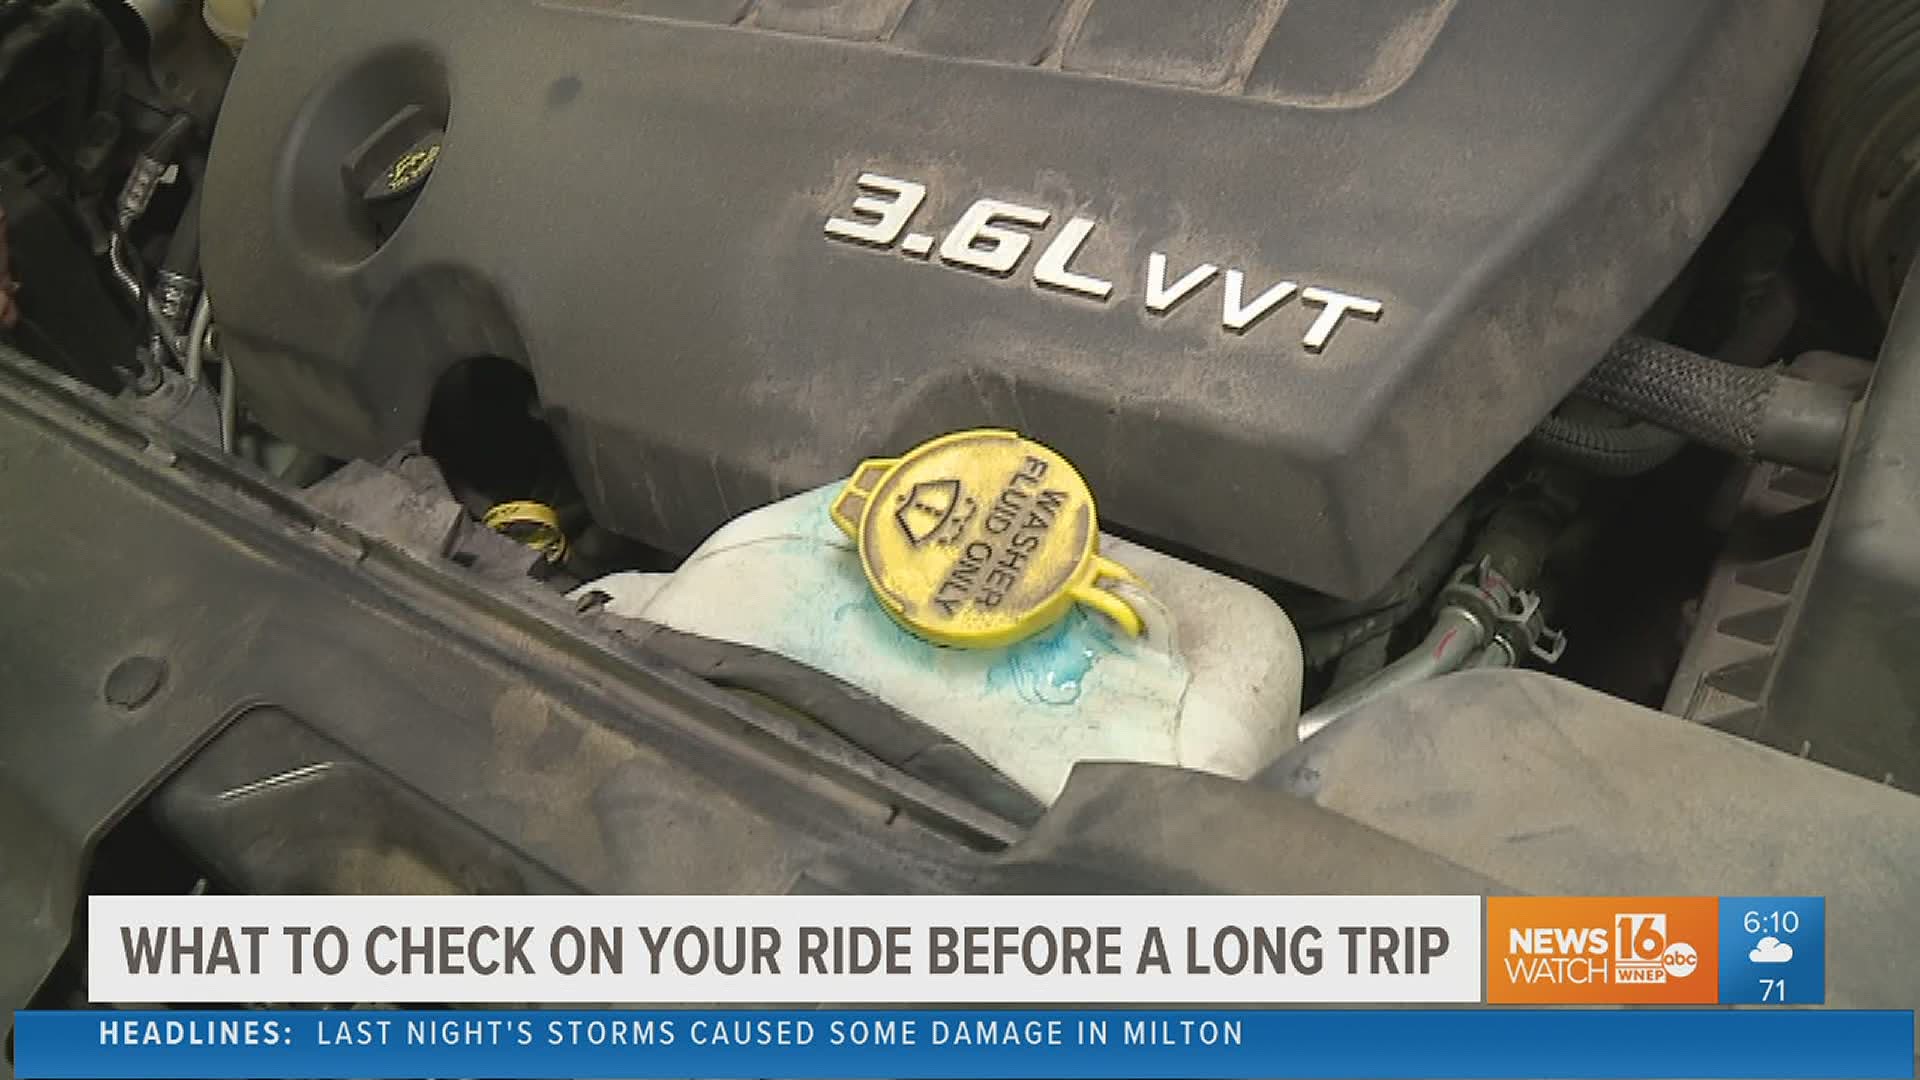 A year with little travel means millions are itching for a road trip. Newswatch 16's Ryan Leckey highlights what to look for before that long drive.